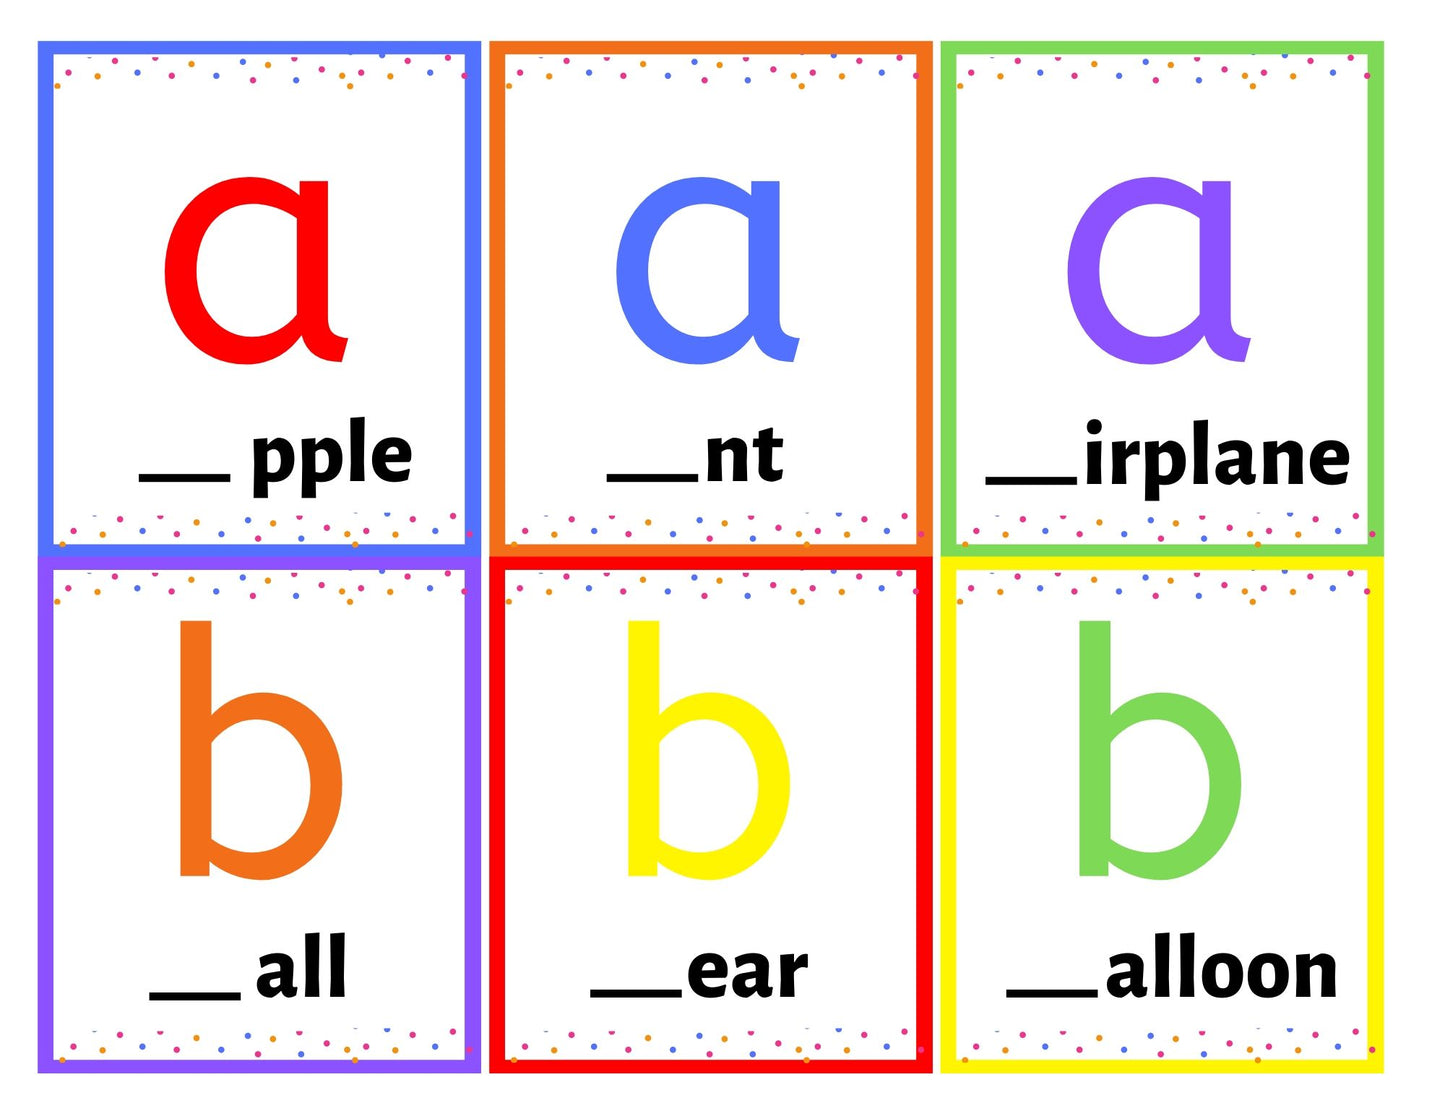 Beginning Sounds Picture Cards (Double-sided)